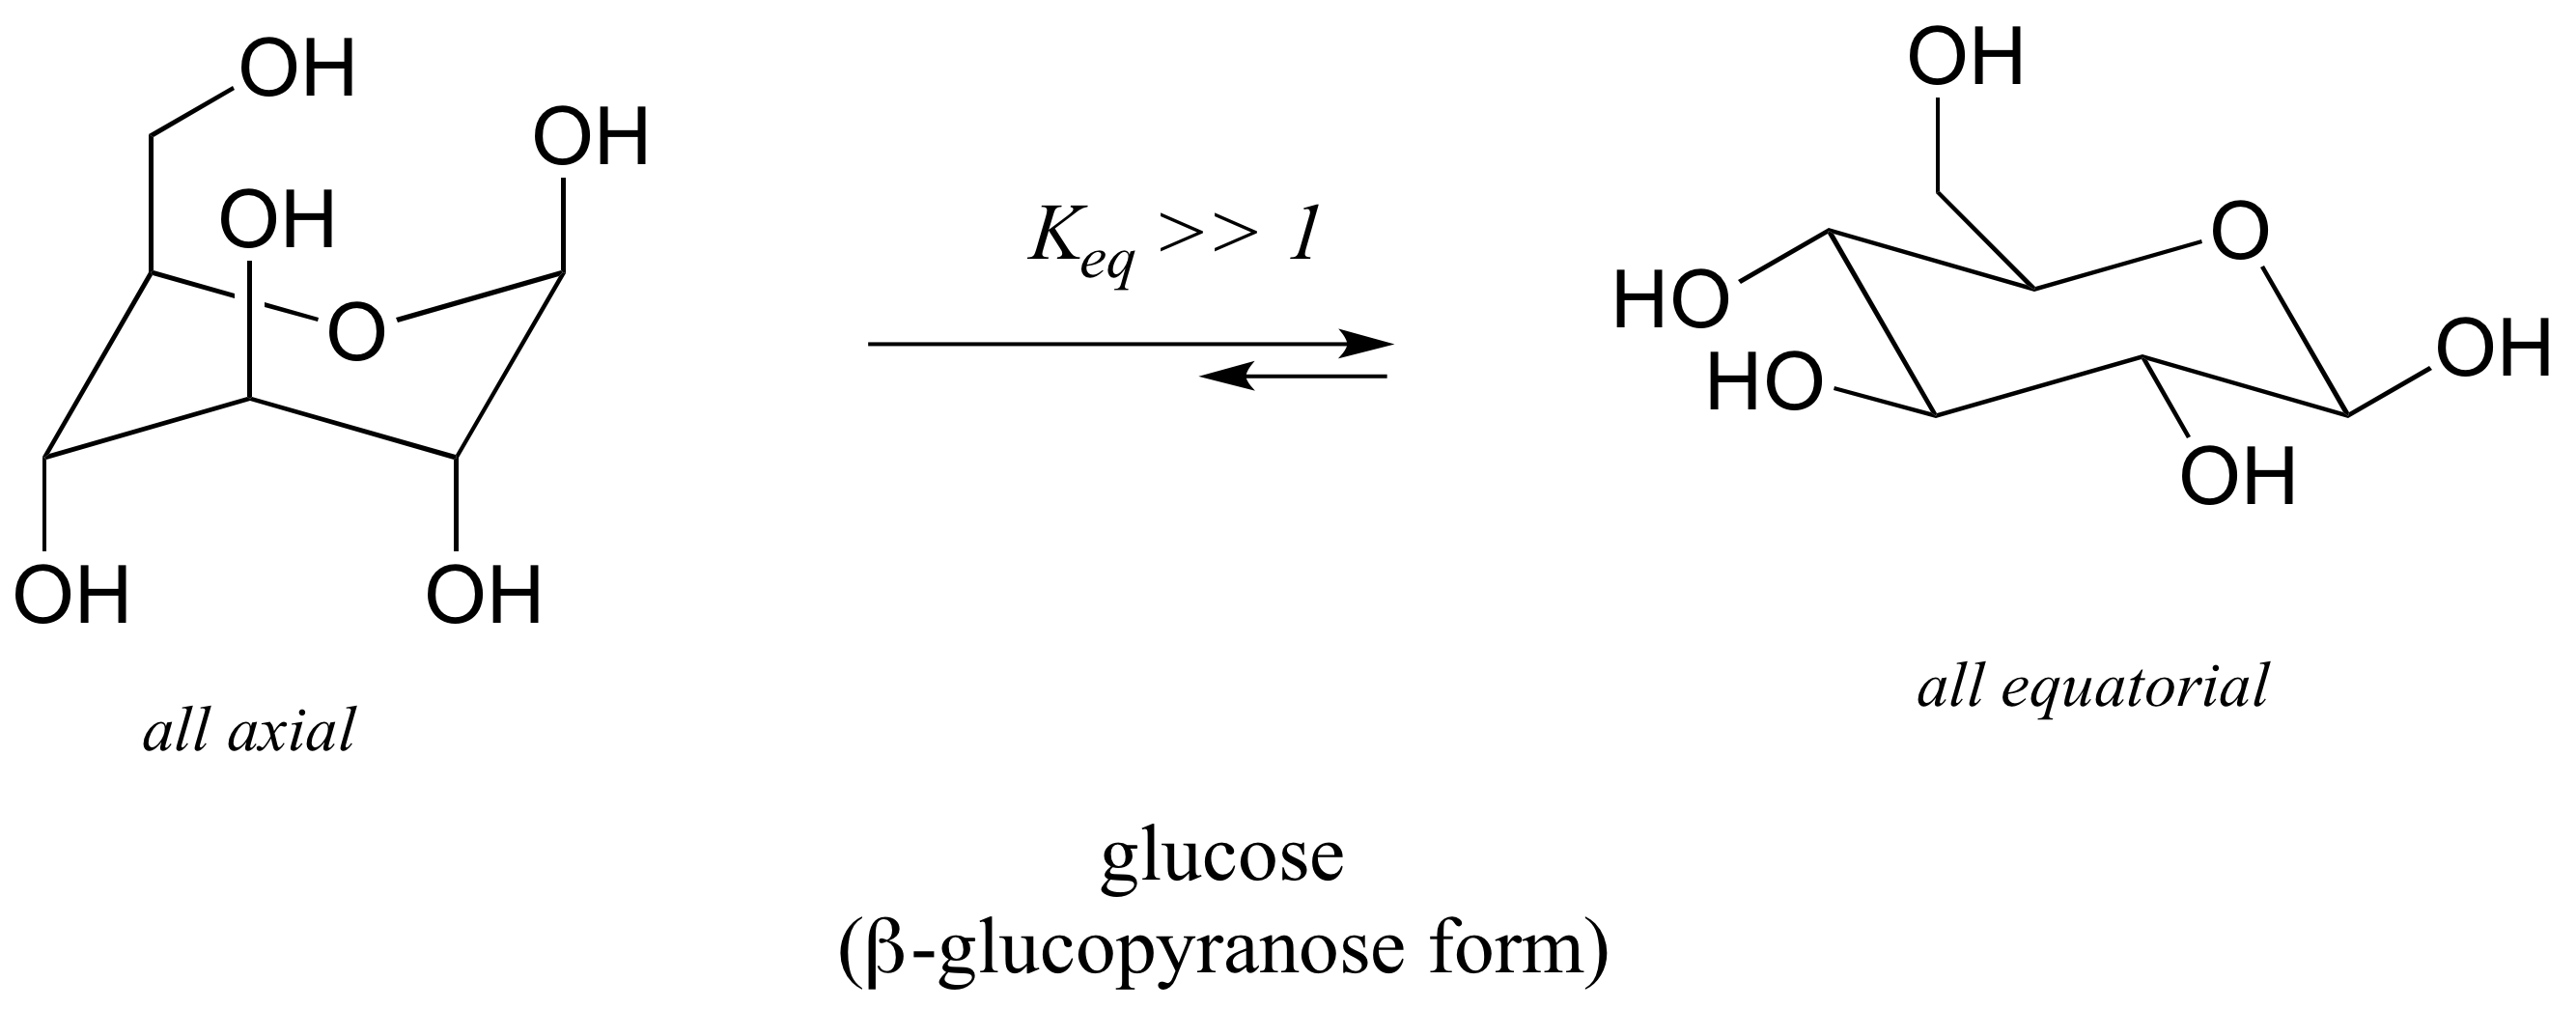 Glucose molecule in the form of a six-membered ring. On left, all substituents axial. On right, all substituents equatorial. Equilibrium constant much greater than one.